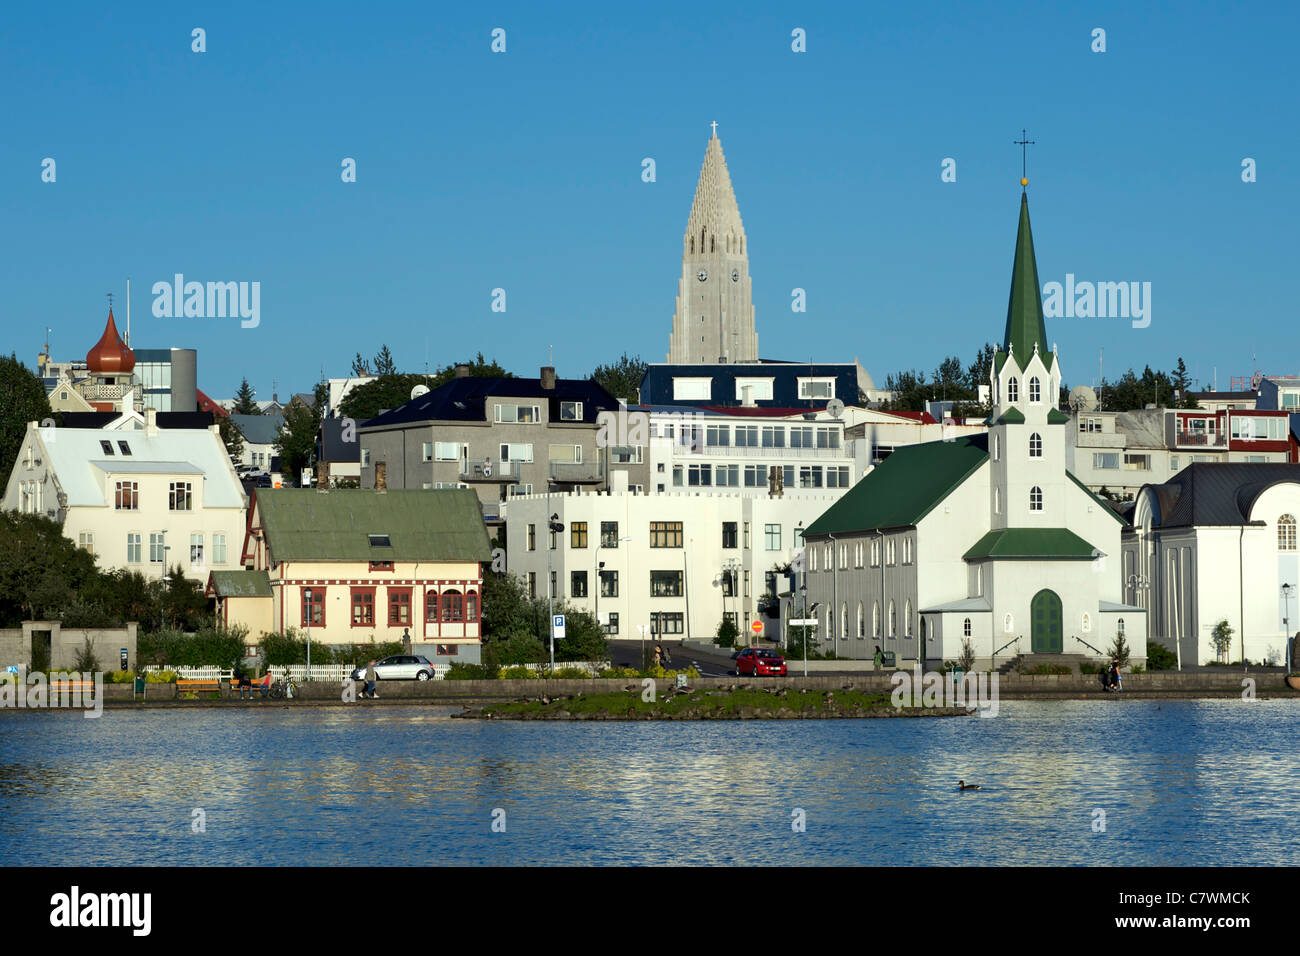 View across (Lake) Tjorn in central Reykjavik, the capital of Iceland. Stock Photo